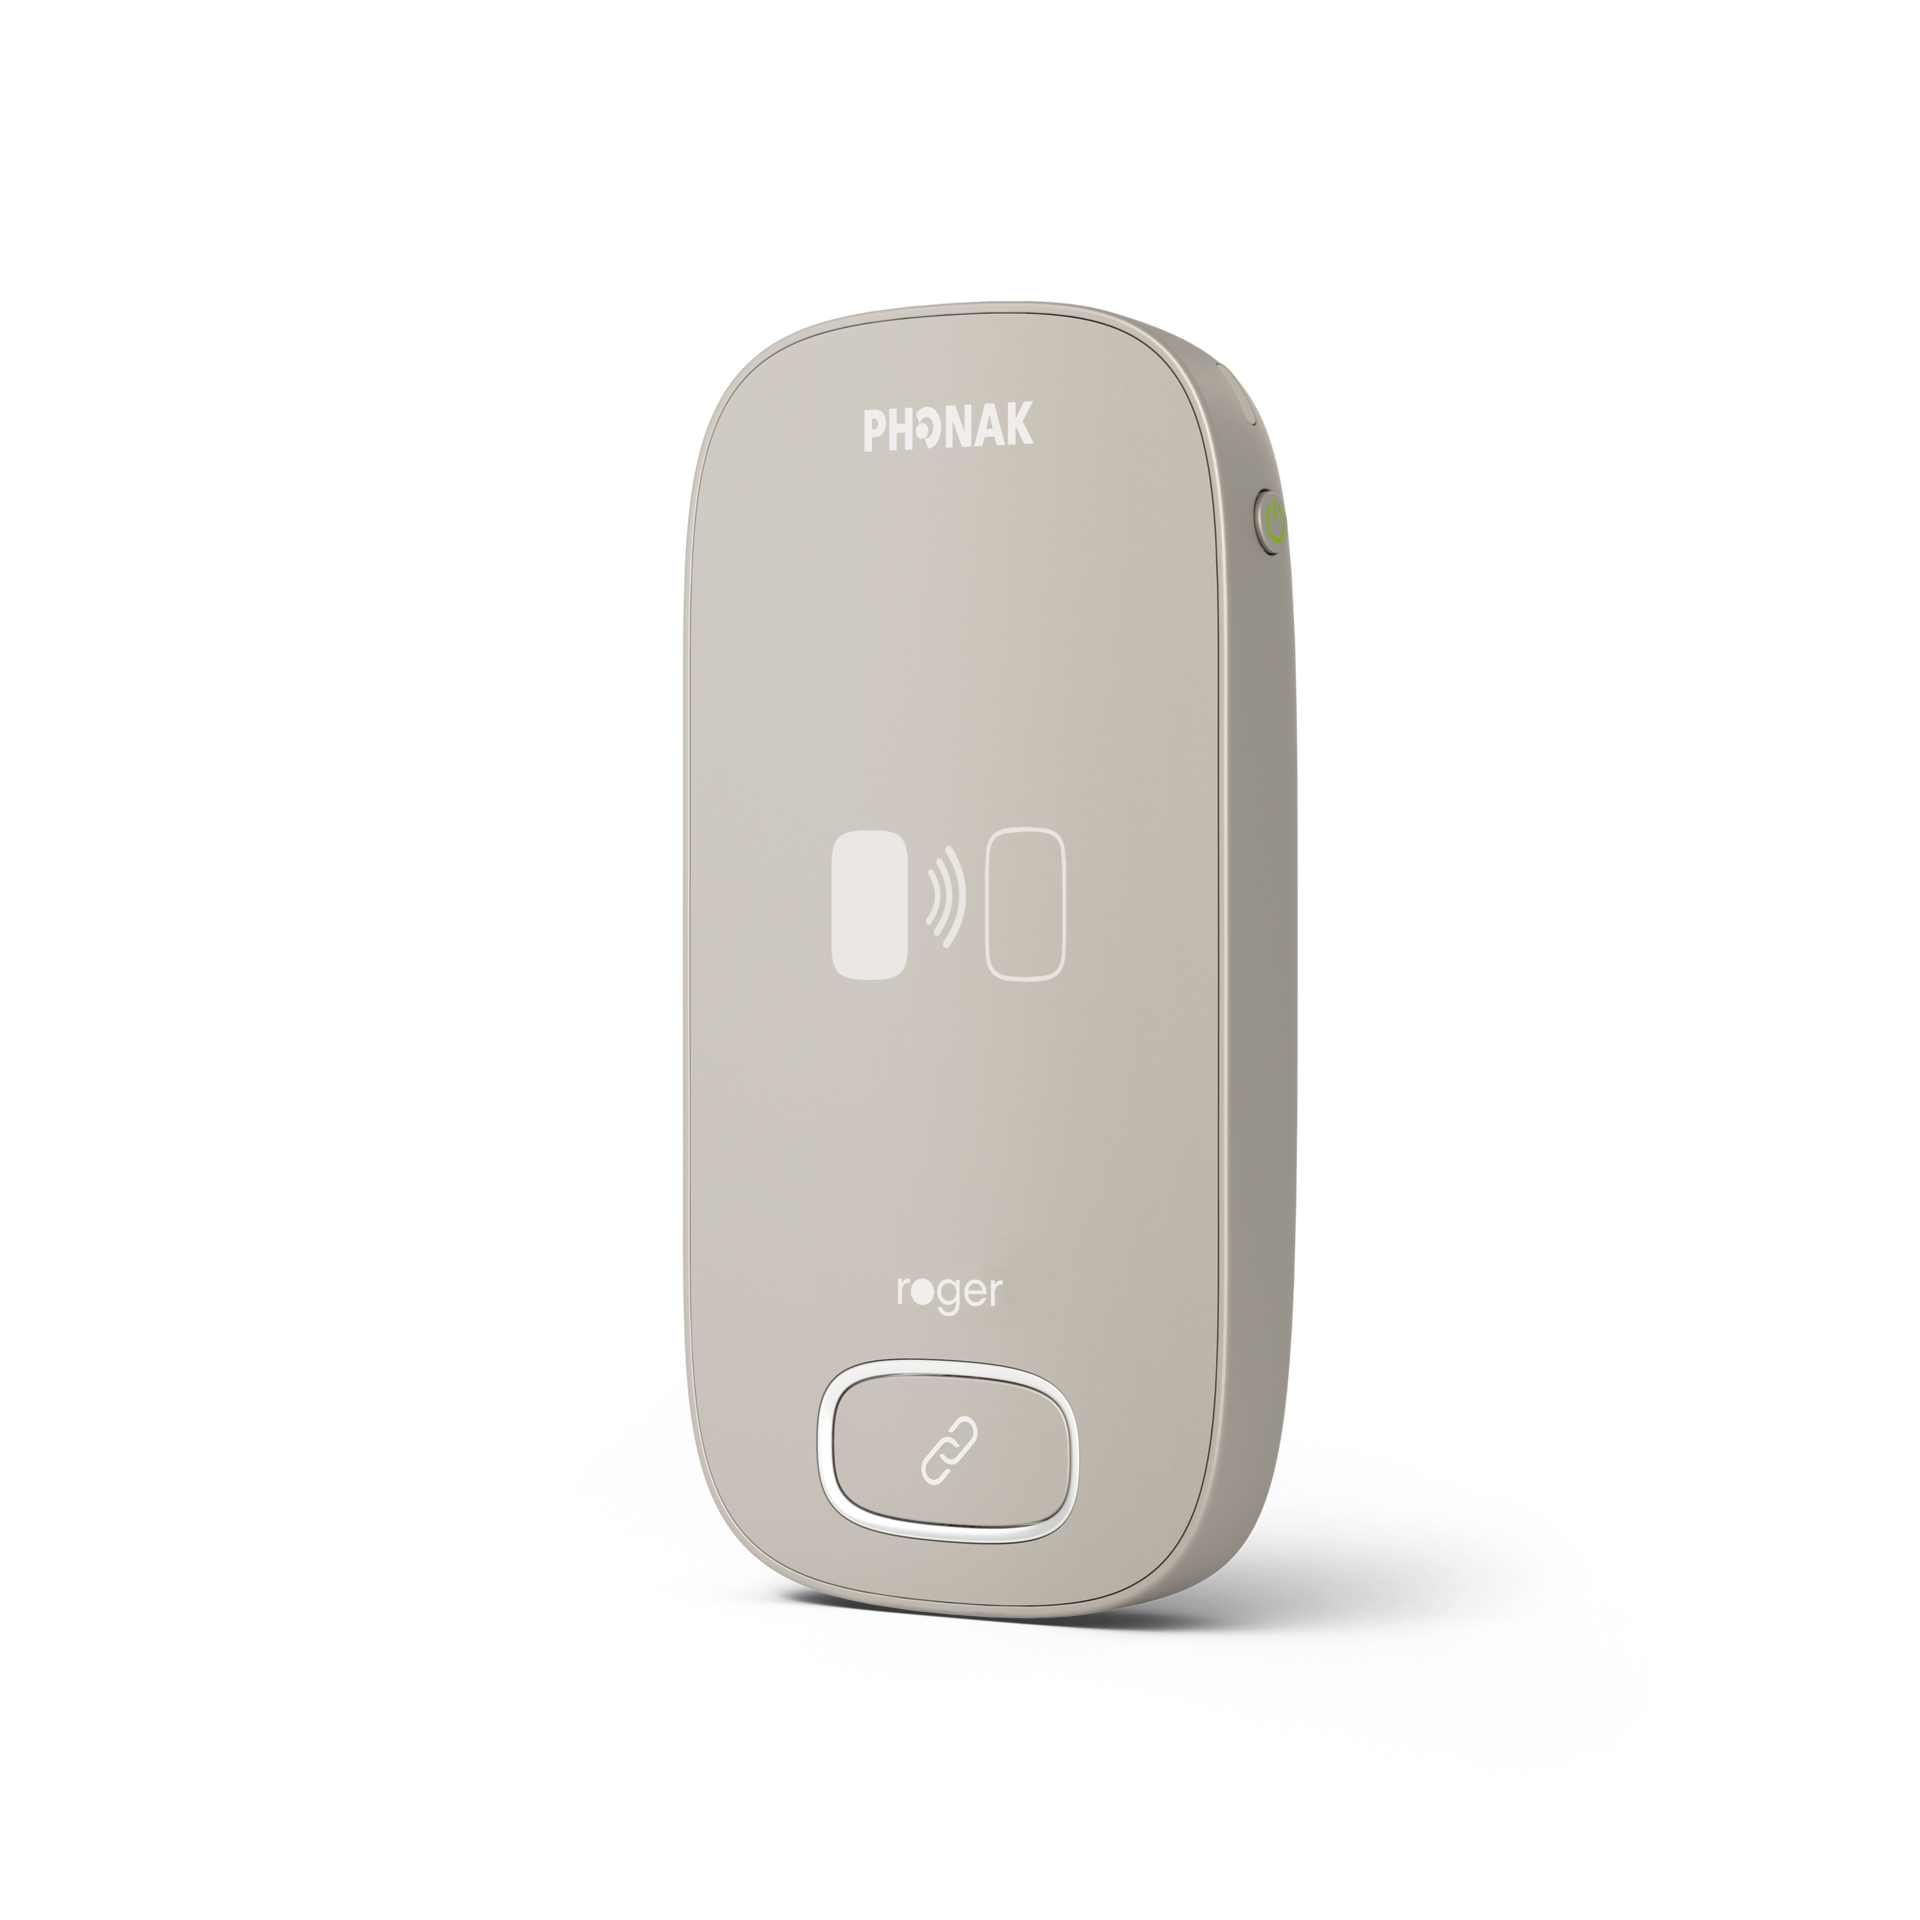 Phonak Roger Repeater hearing aid accessory.